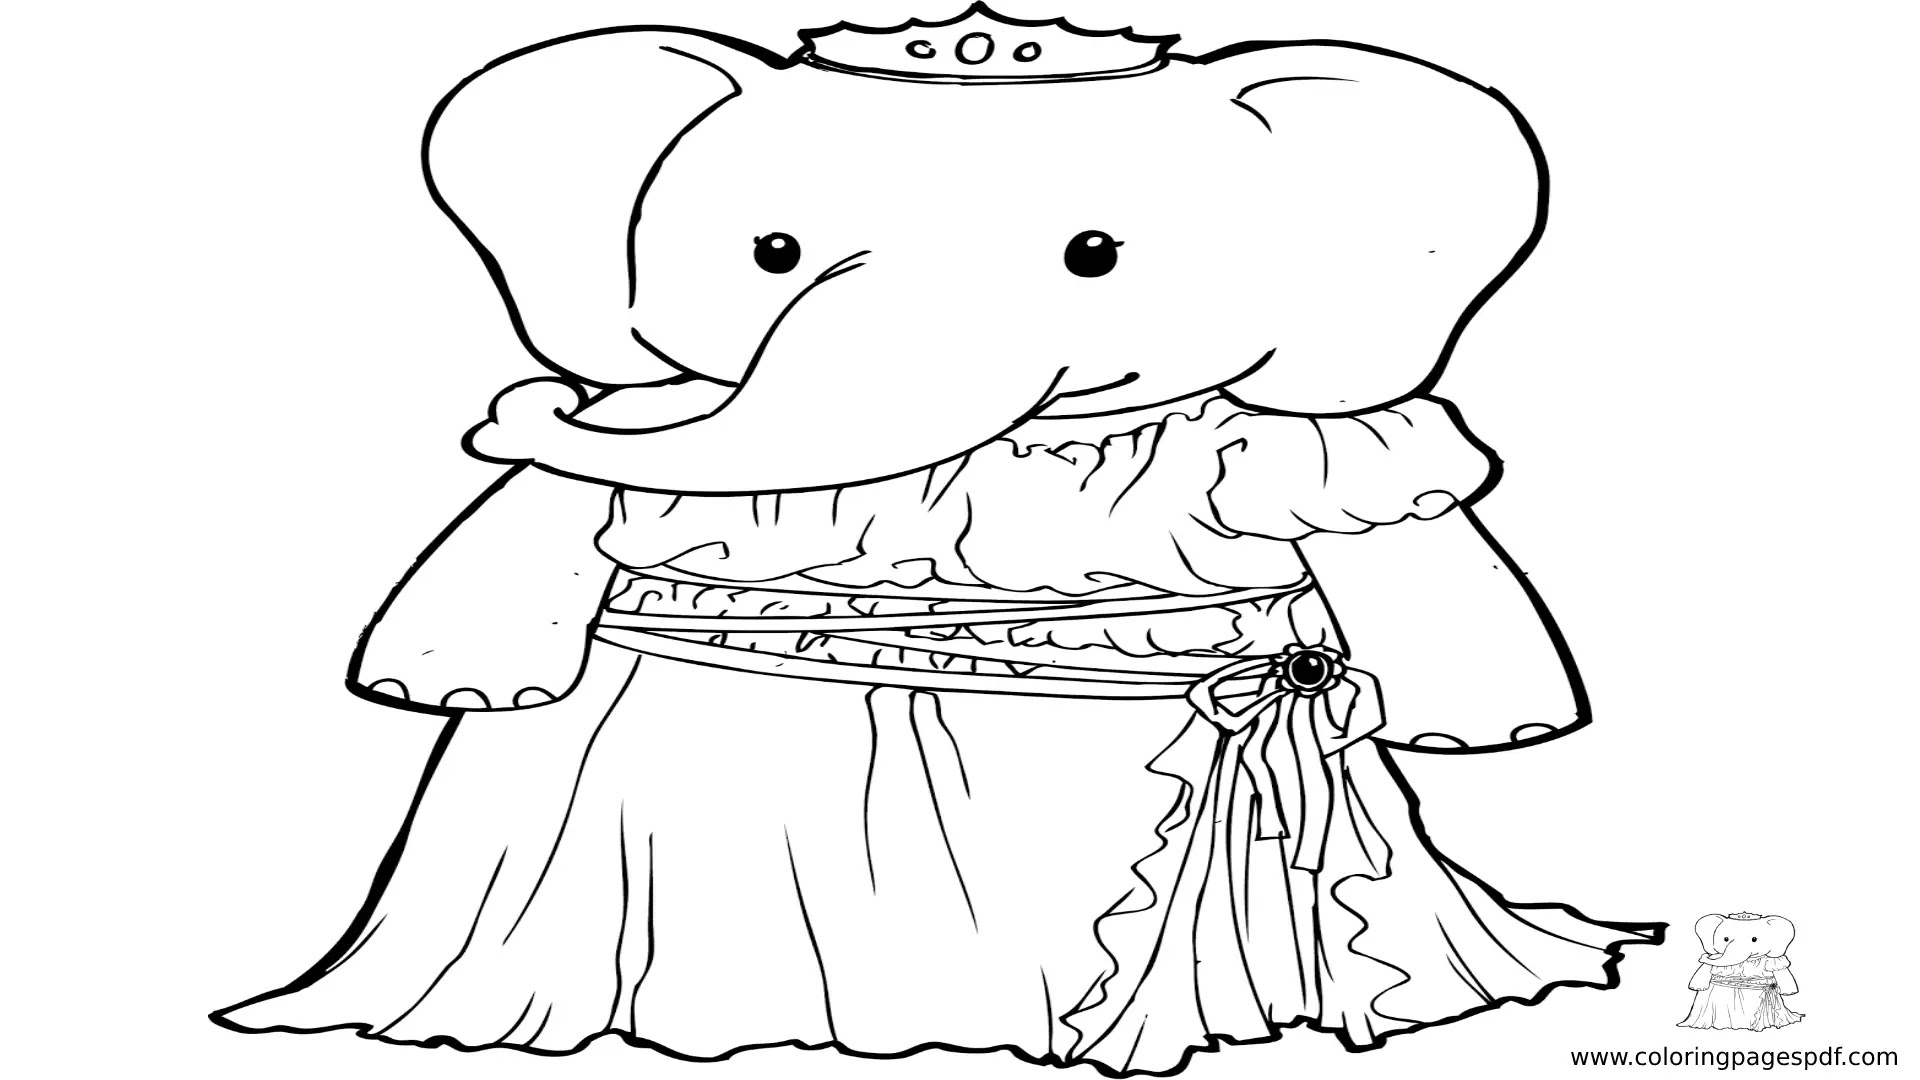 Coloring Pages Of A Cute Elephant Princess